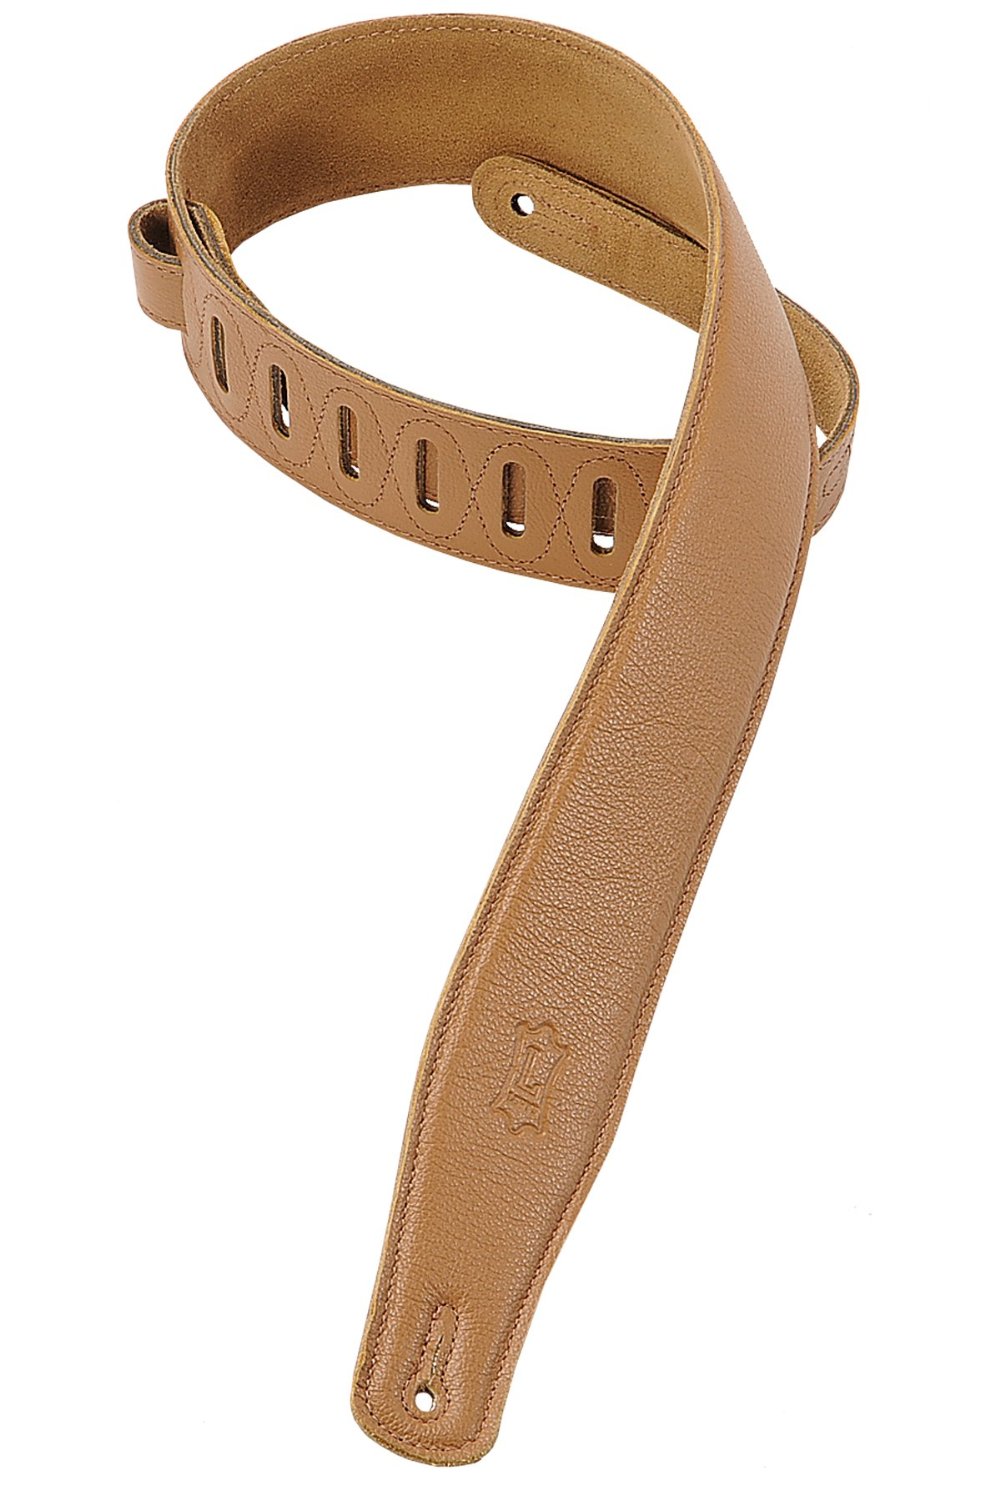 Levy's M26GF 2.5" Leather Strap Tan